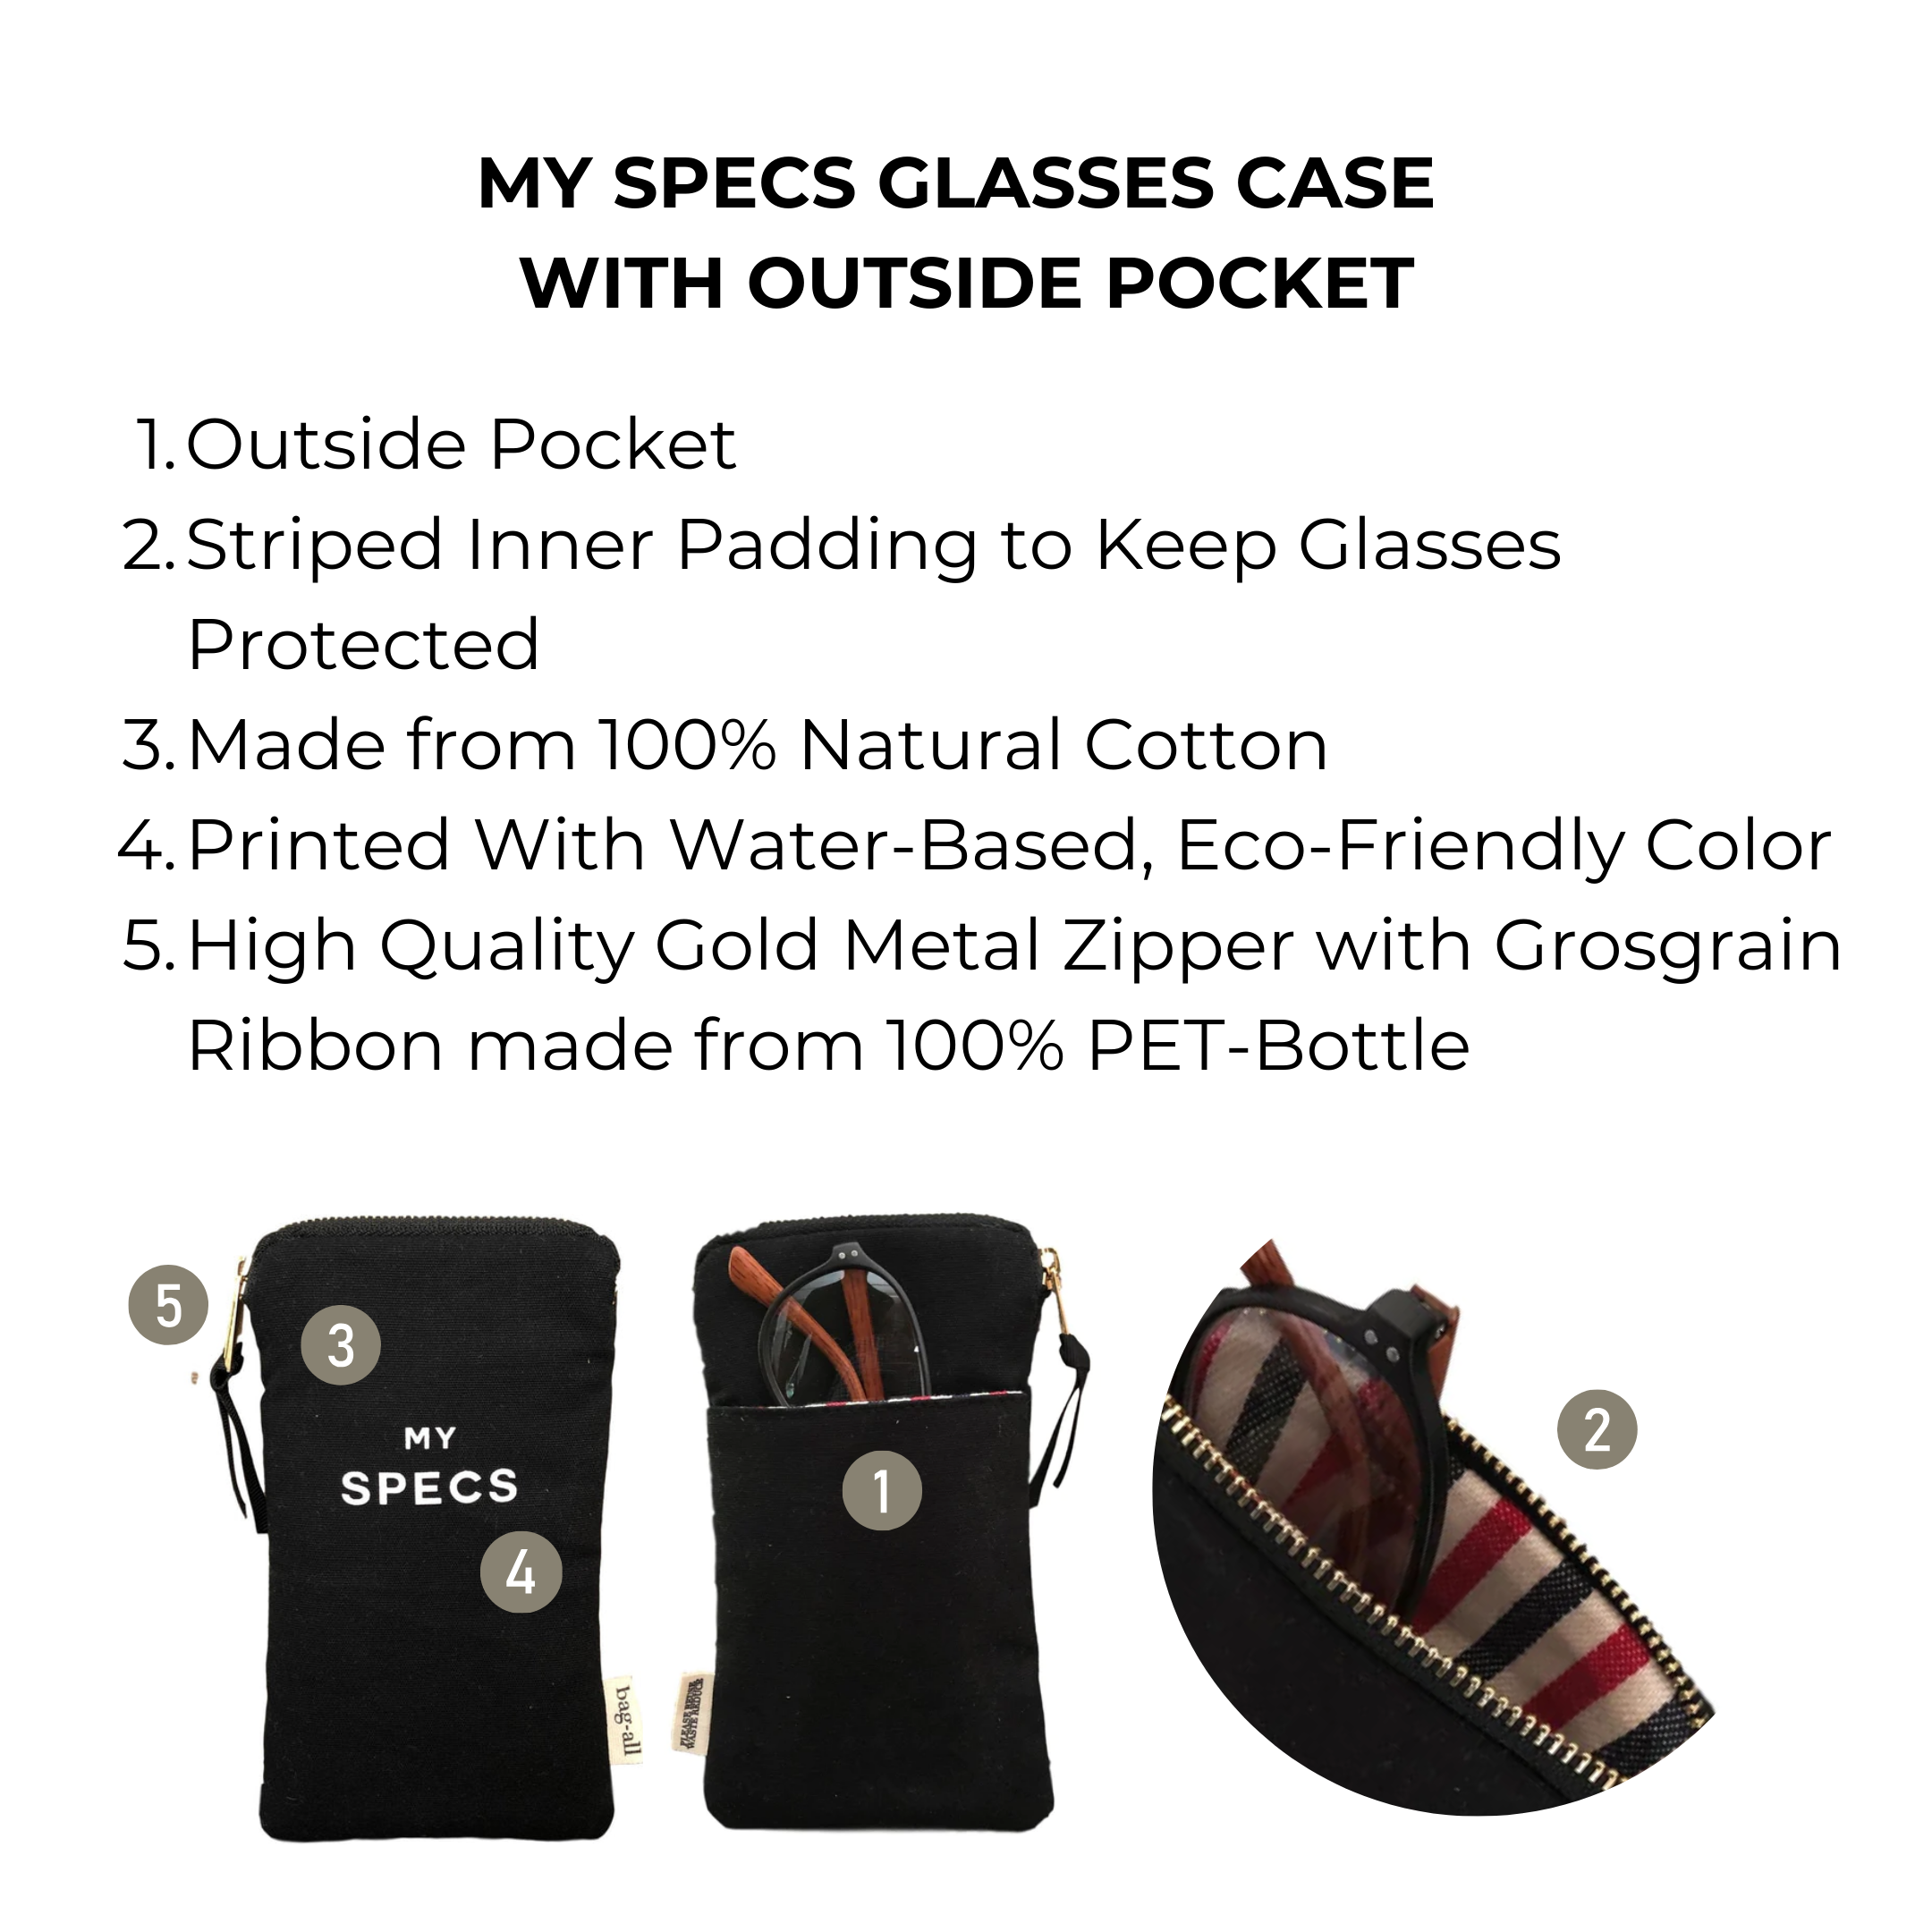 My Specs Glasses Case with Outside Pocket, Black - Bag-all